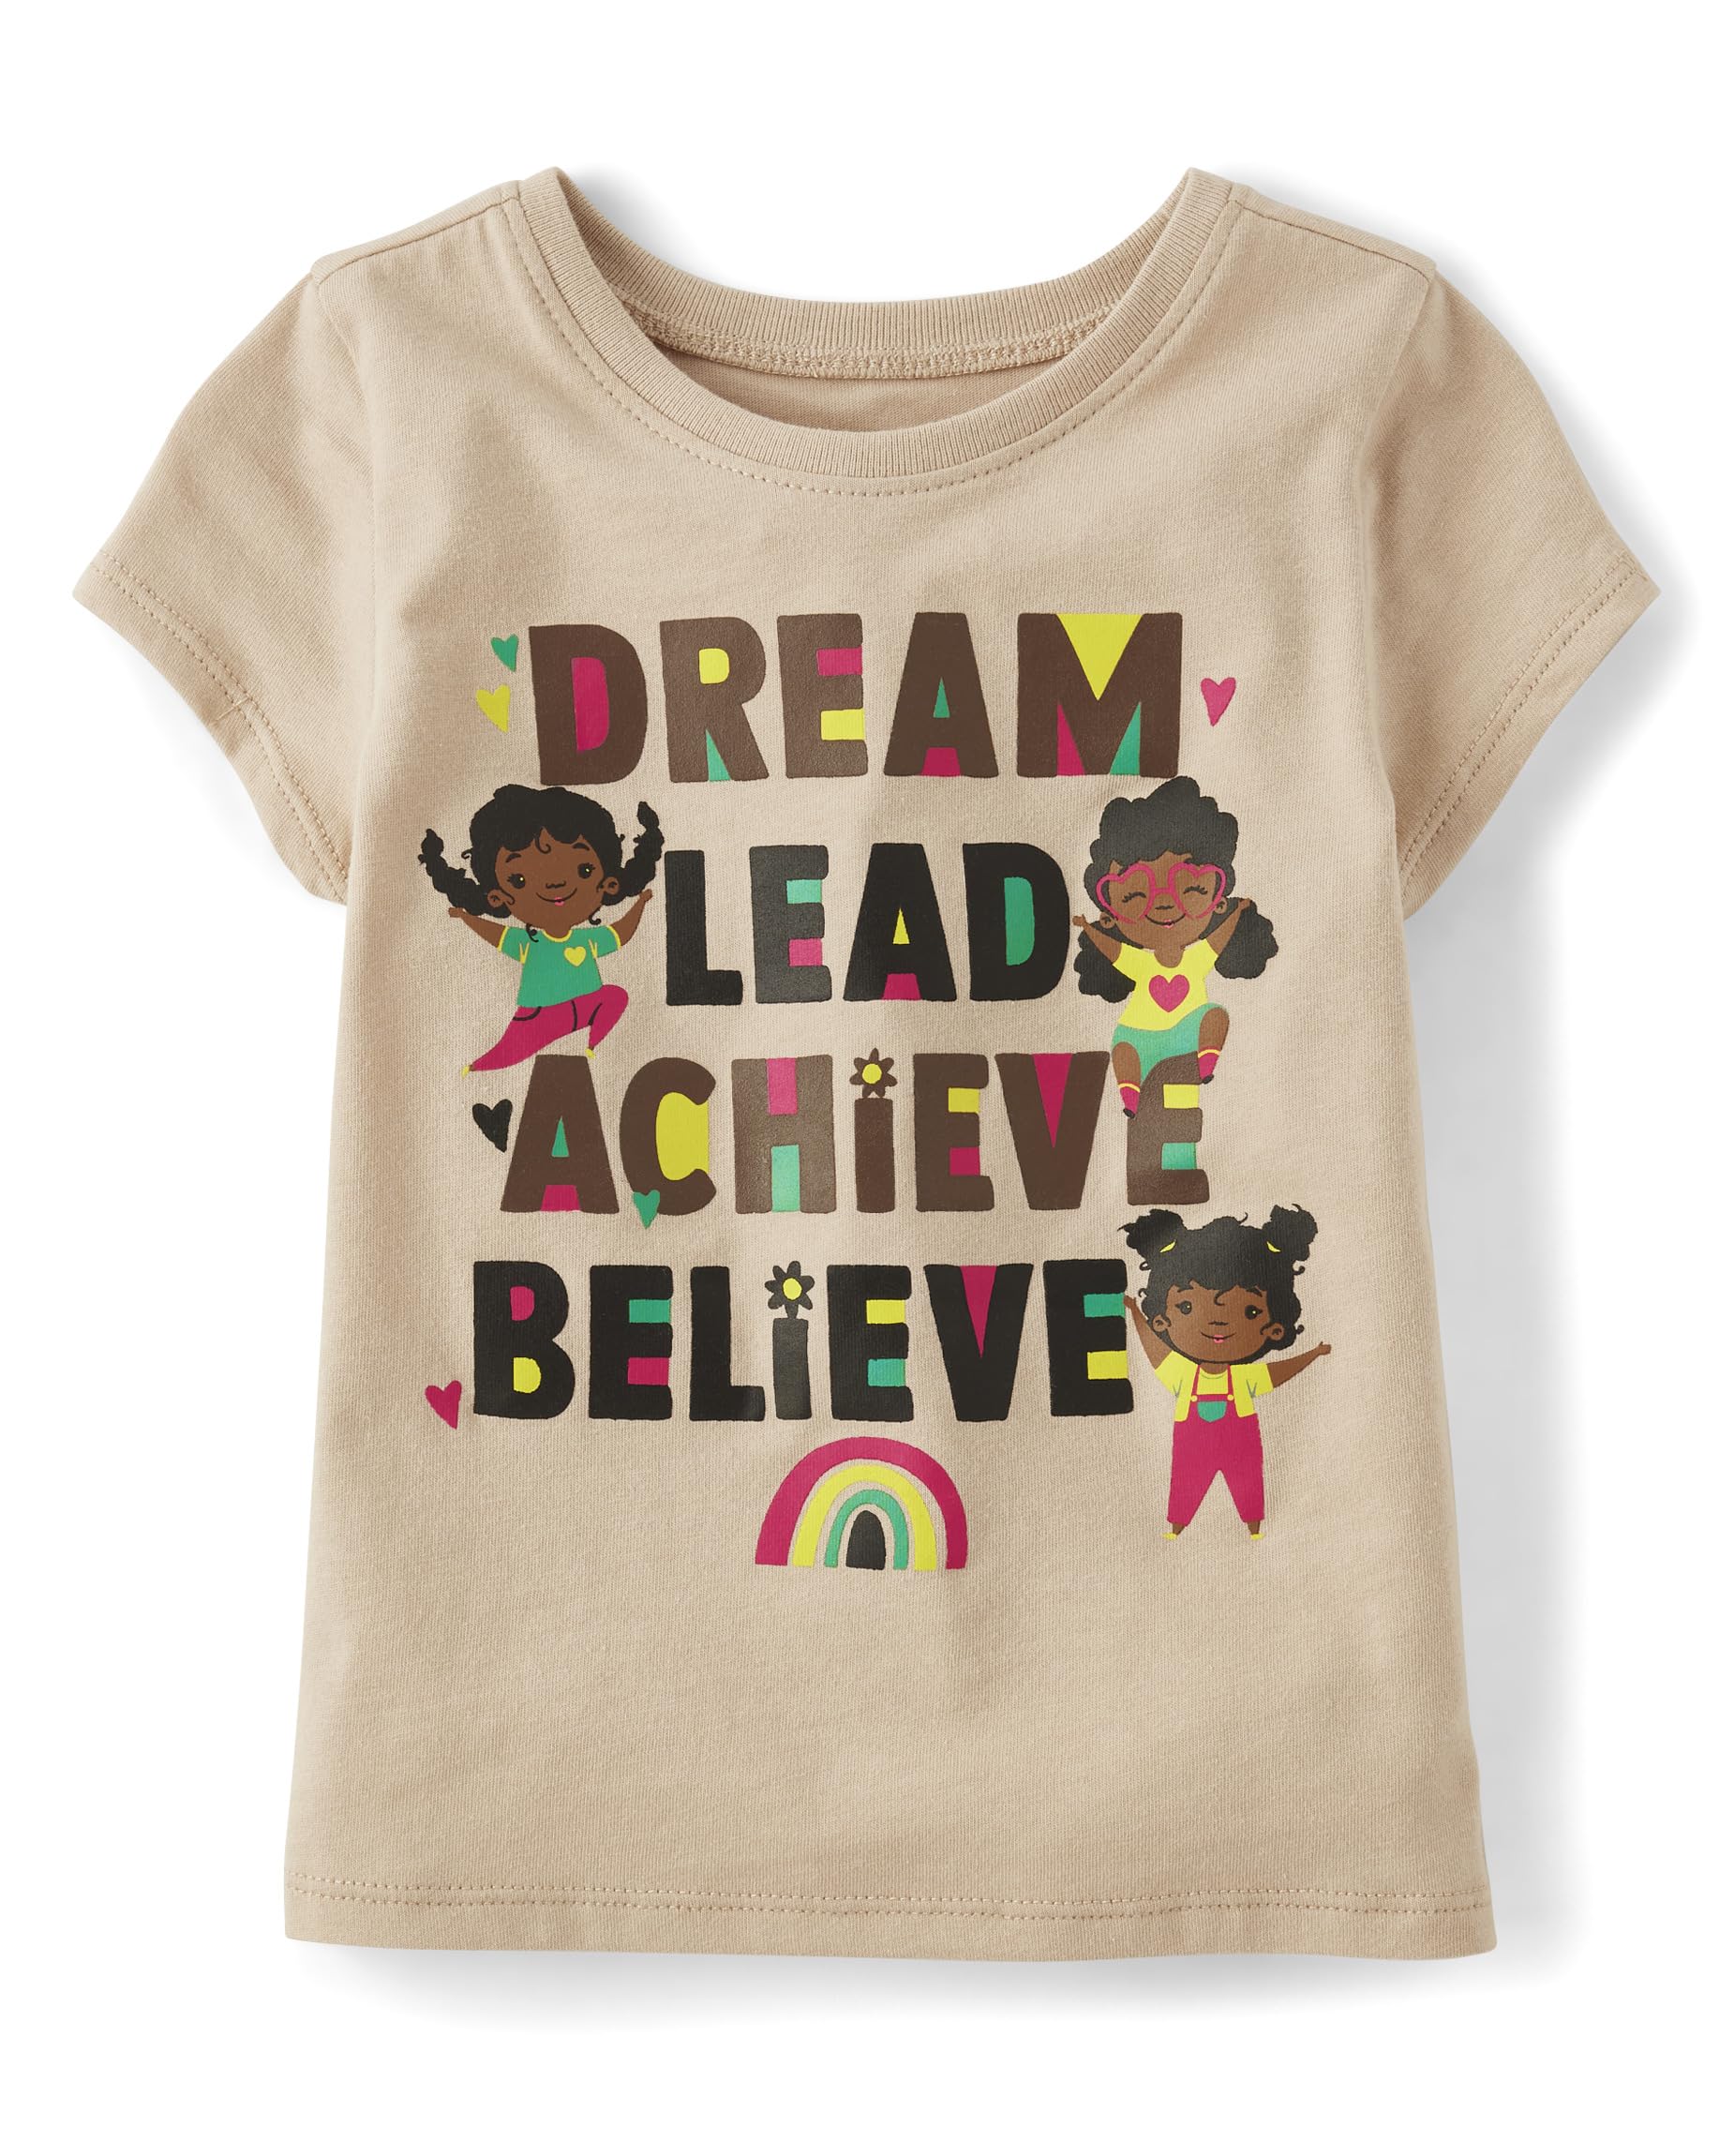 The Children's Place Baby Toddler Girls Short Sleeve Graphic T-Shirt, Dream,Lead,Achieve,Believe